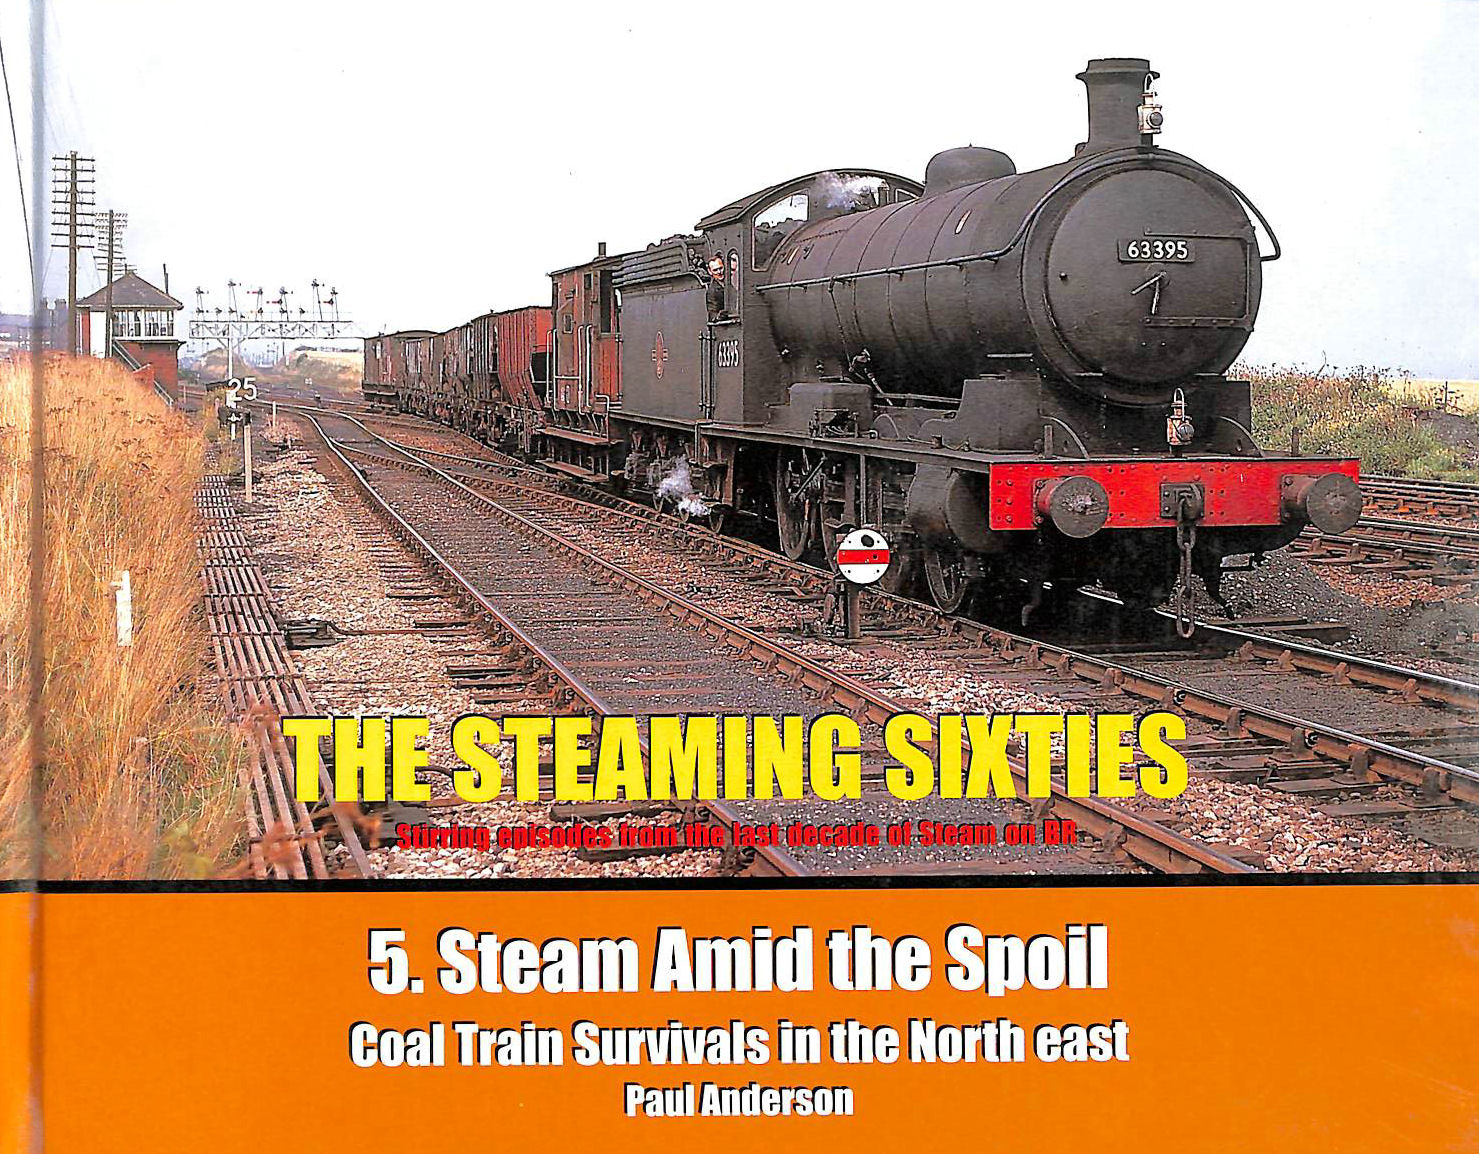 ANDERSON, PAUL - Steam Amid the Spoil (No. 5) (The Steaming Sixties)